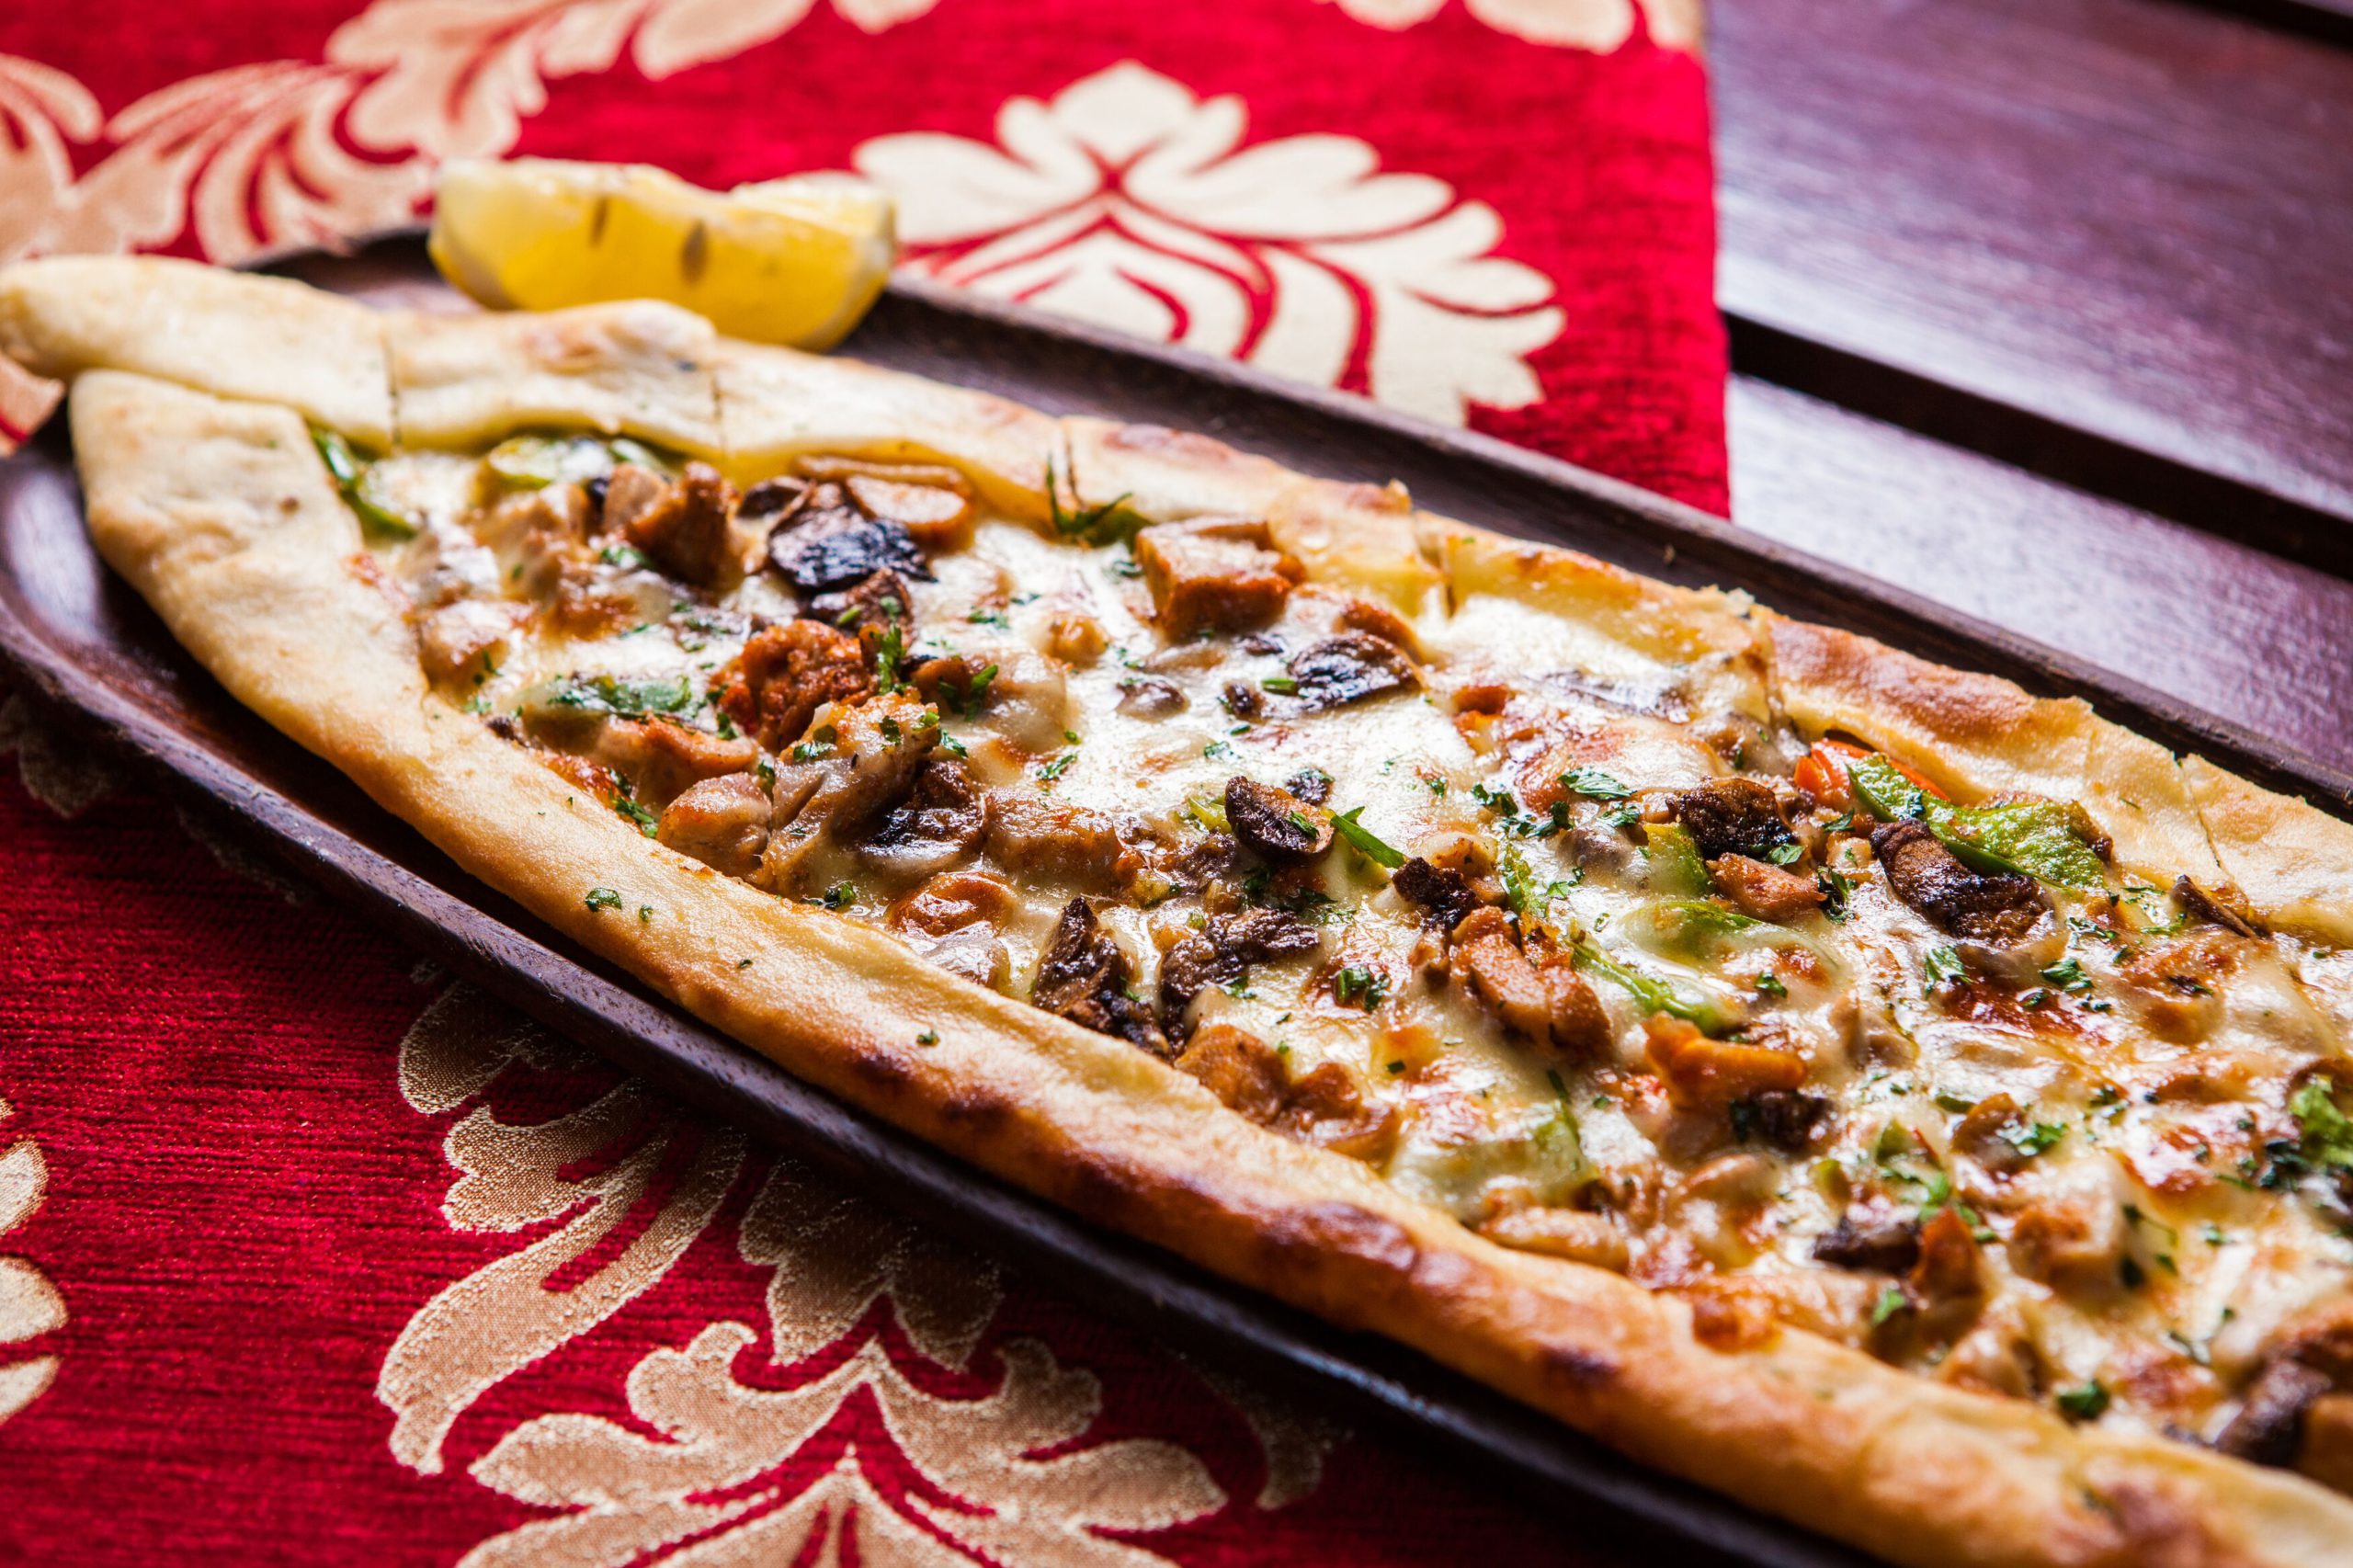 Start Your Week Right With $10 Pides at Ahmet's